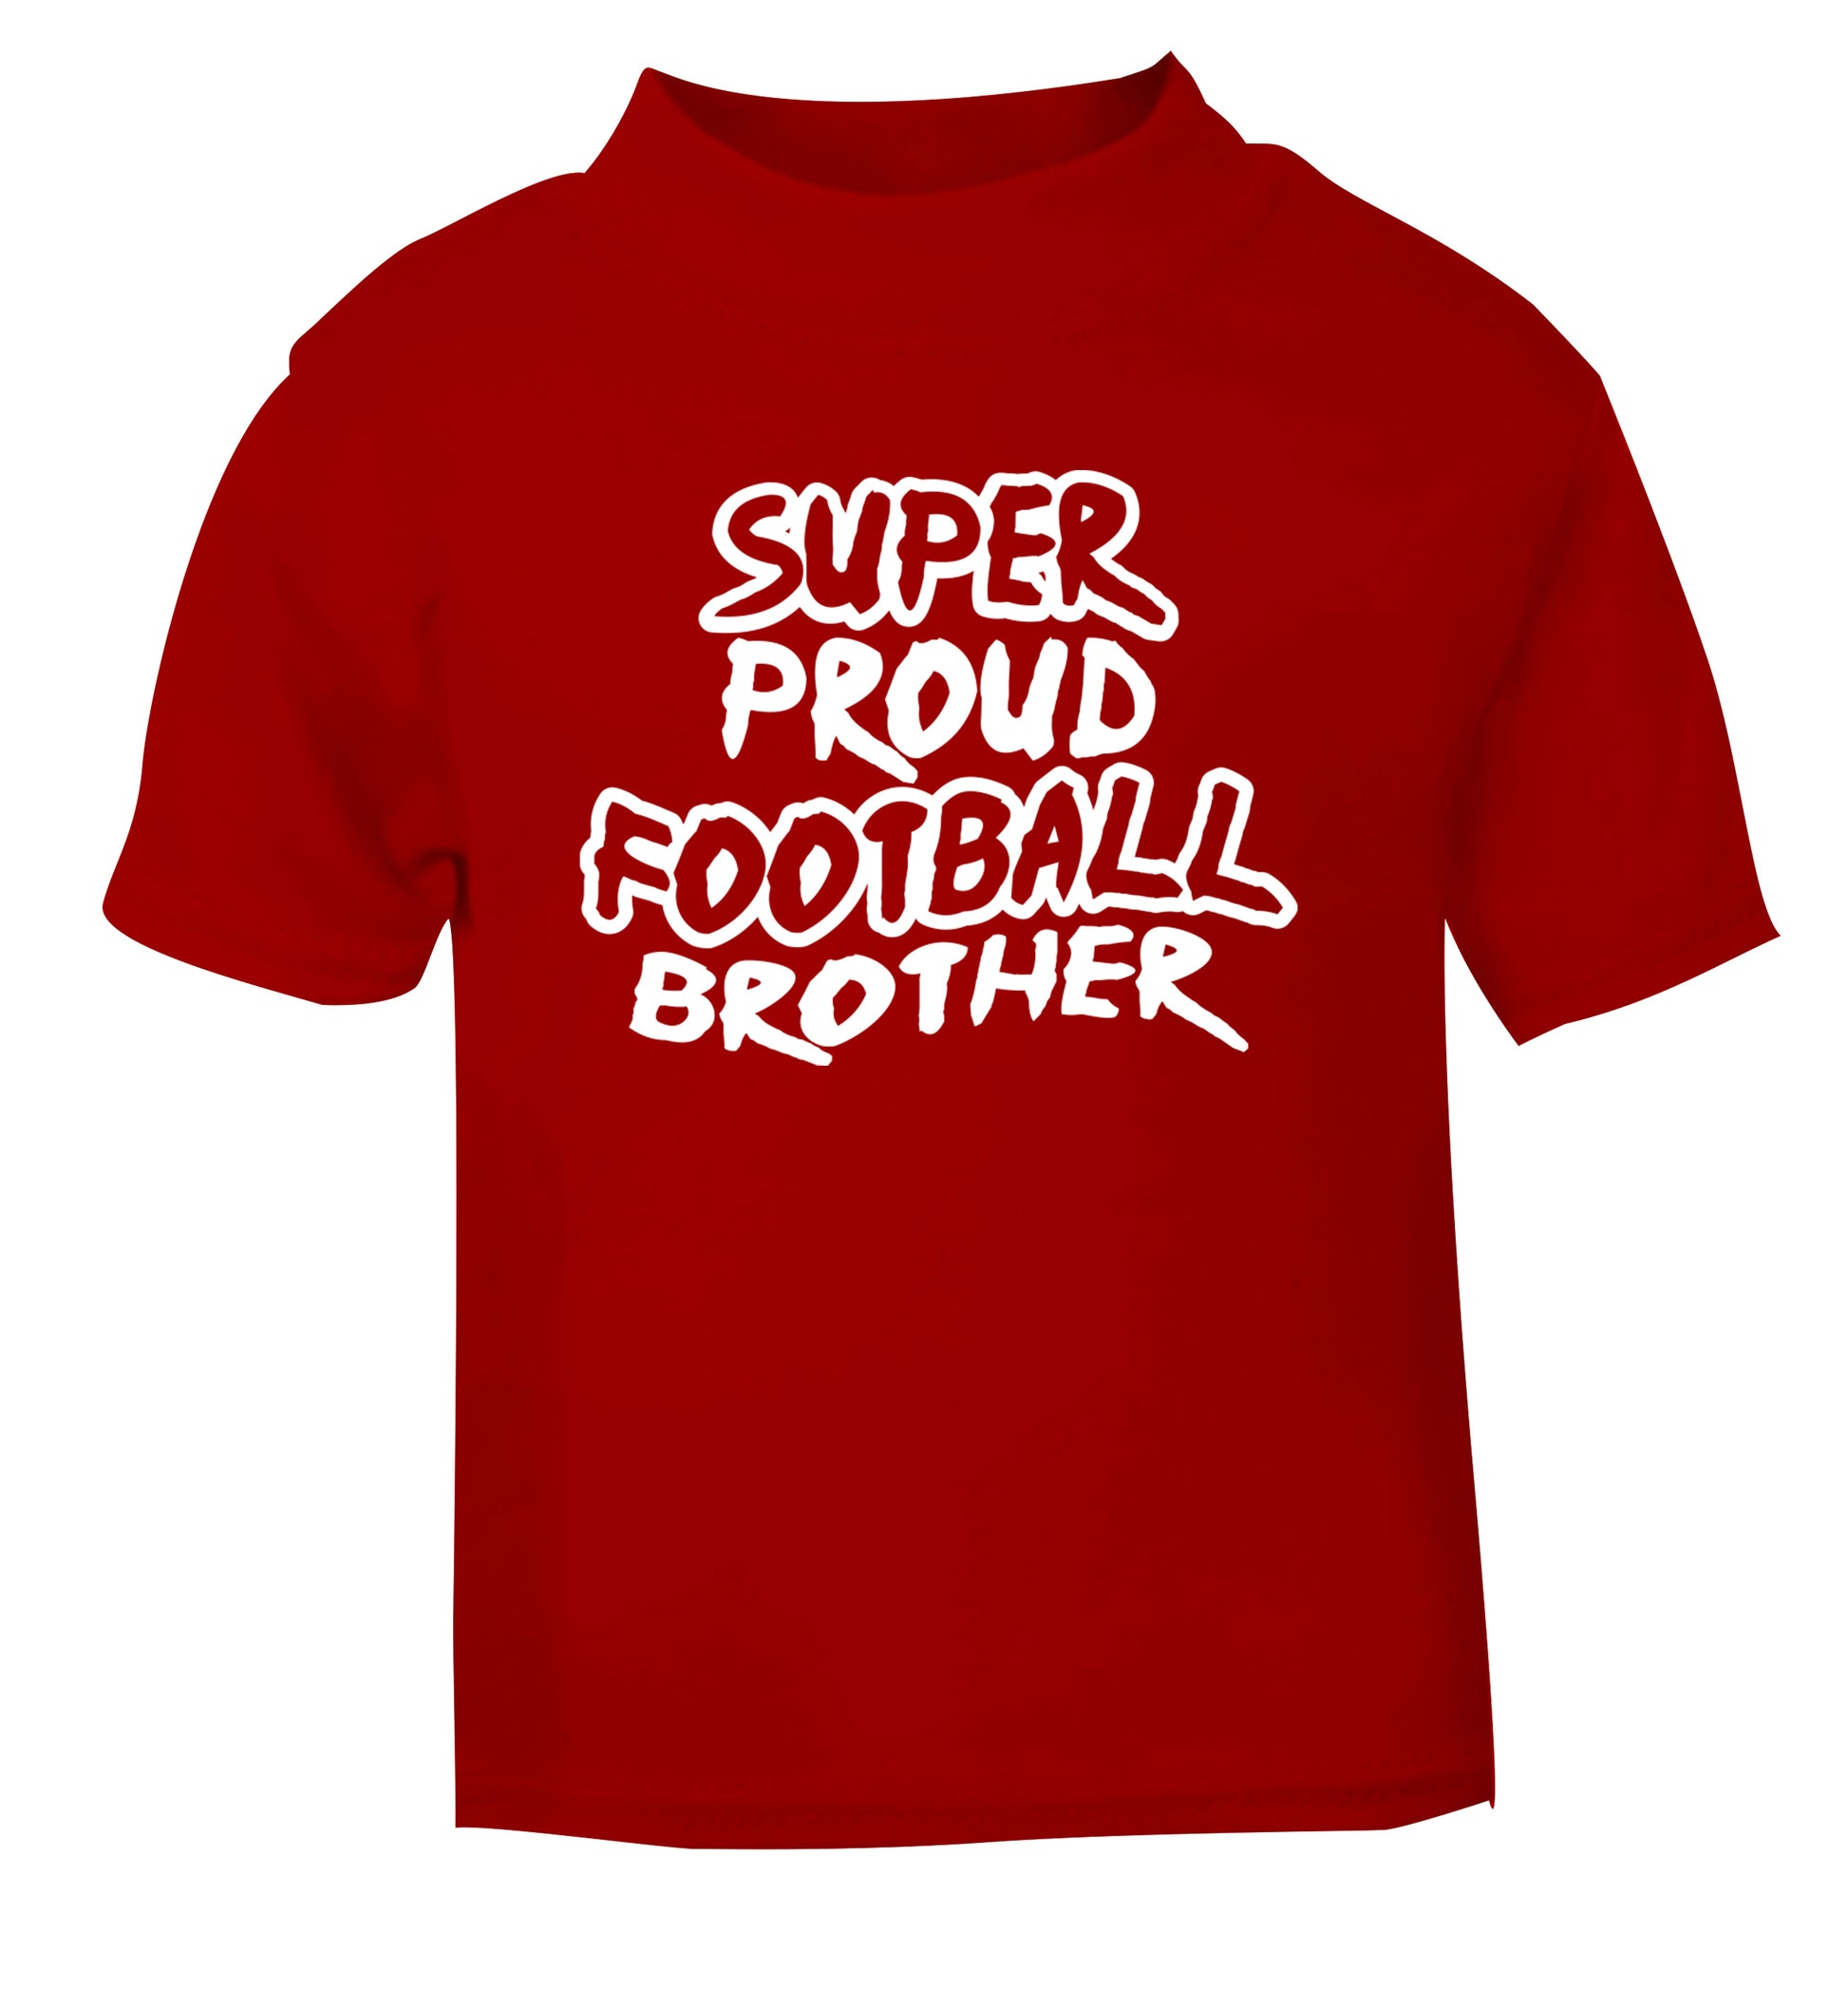 Super proud football brother red Baby Toddler Tshirt 2 Years